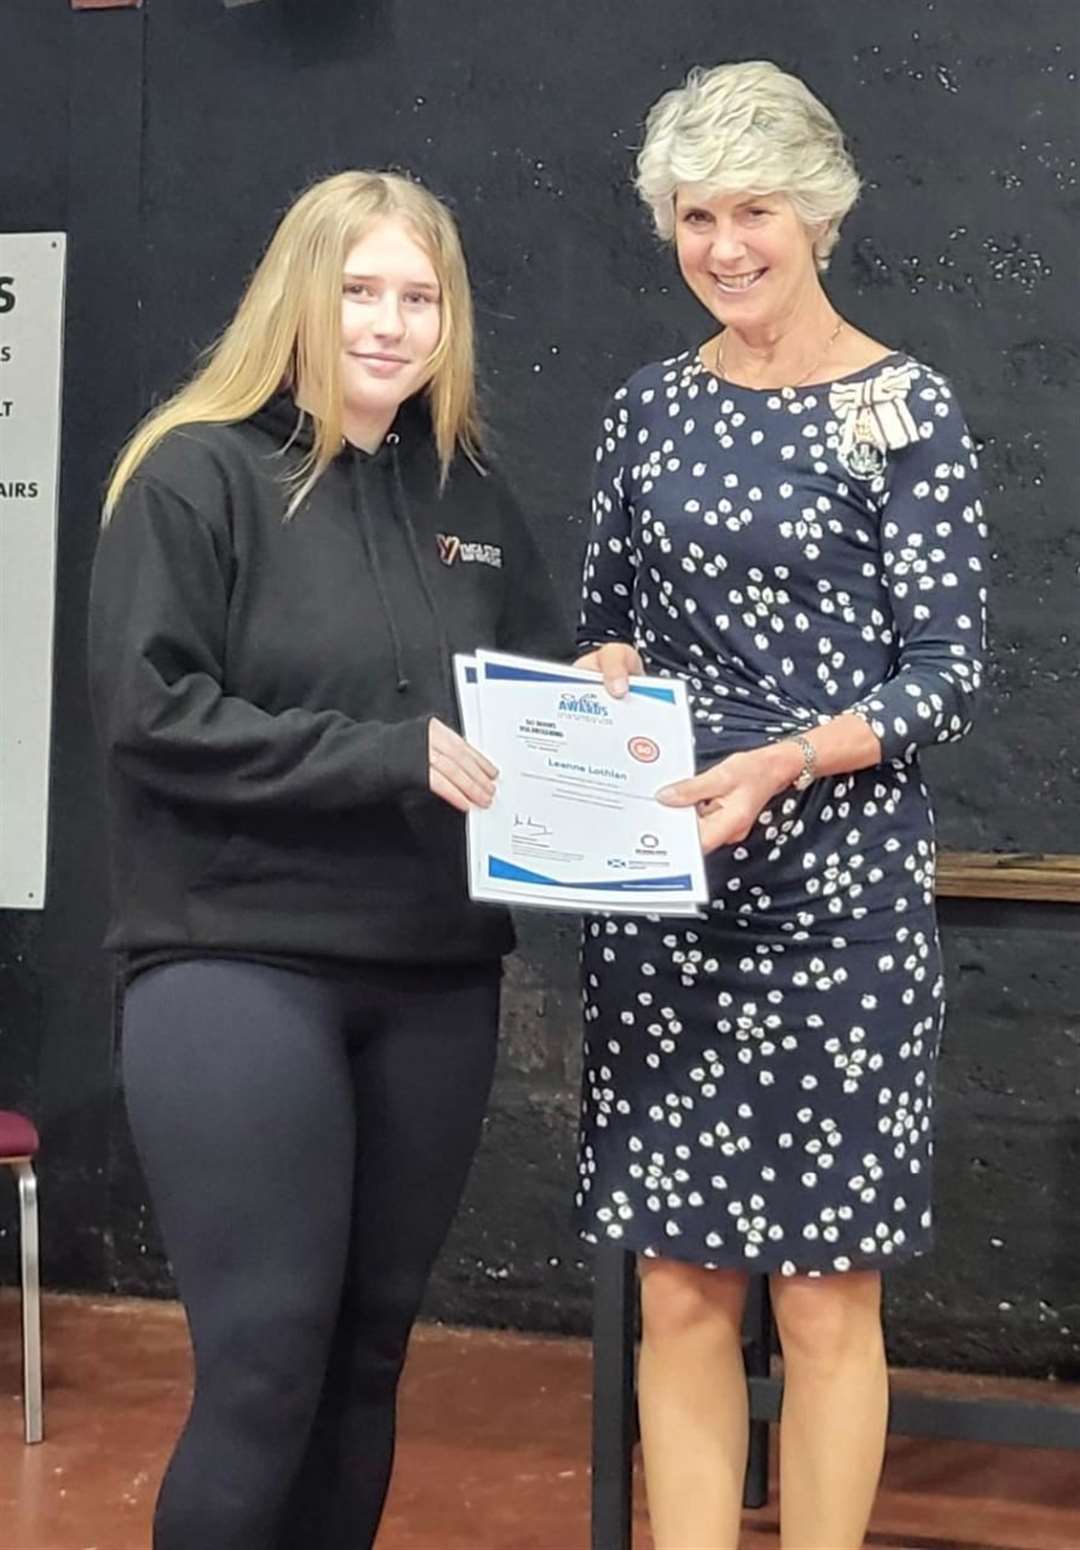 Leanne Lothian completed 100 hours of volunteering to receive a Saltire award.